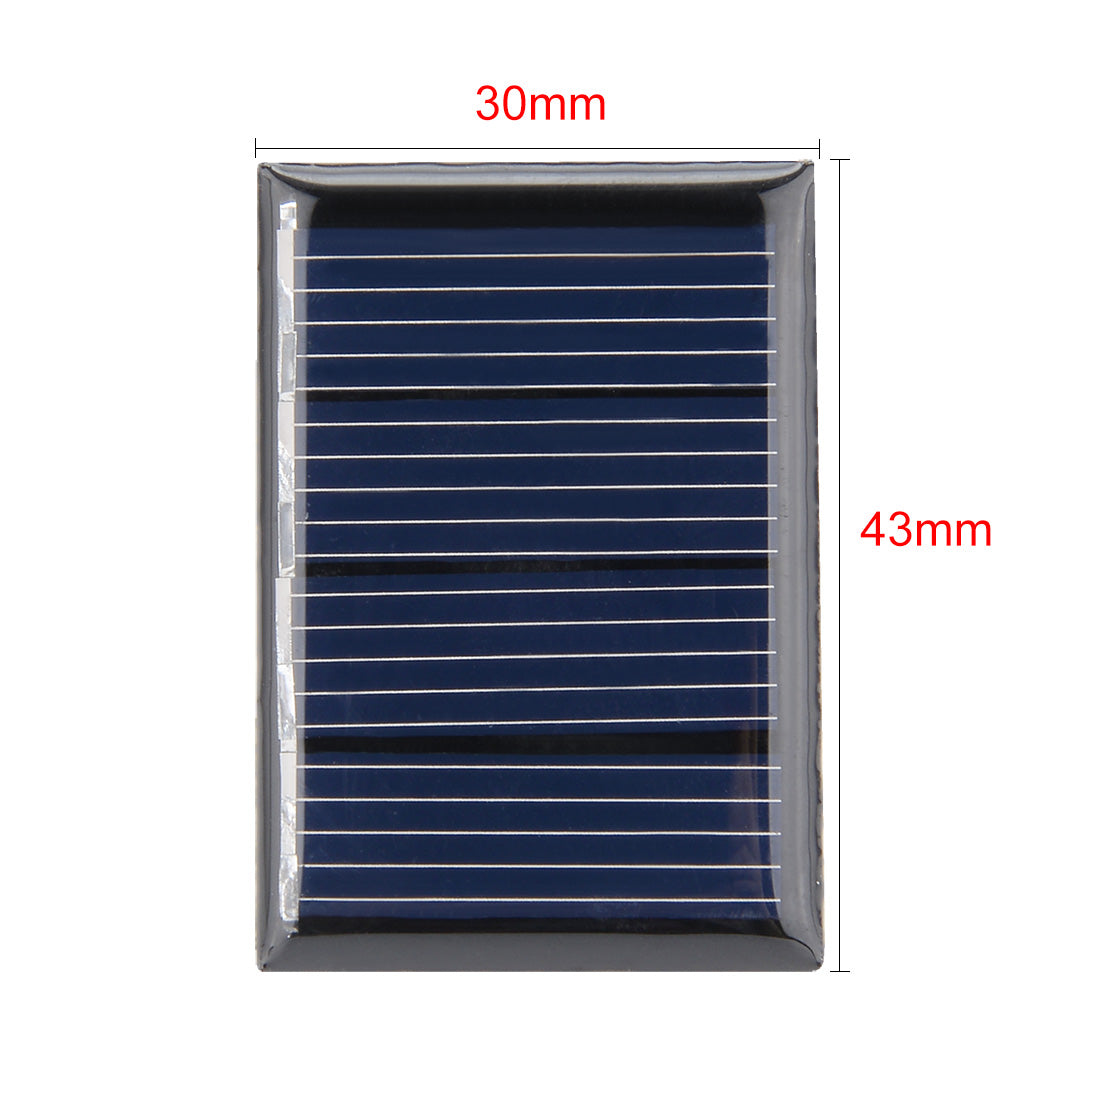 uxcell Uxcell 5Pcs 2V 60mA Poly Mini Solar Cell Panel Module DIY for Light Toys Charger 43mm x 30mm